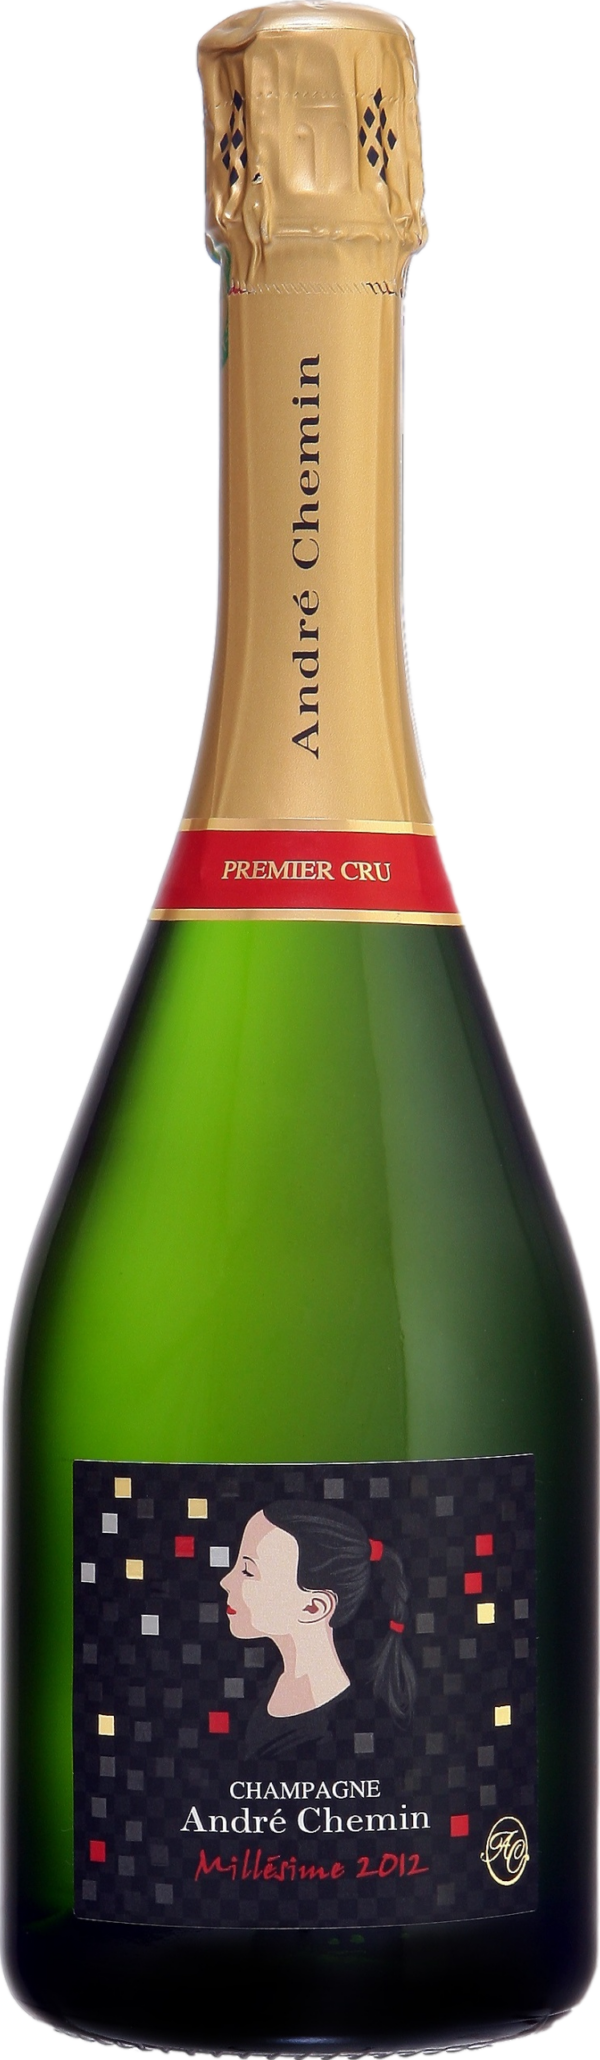 Product image of Champagne Andre Chemin Premier Cru Millesime Brut 2012 from 8wines